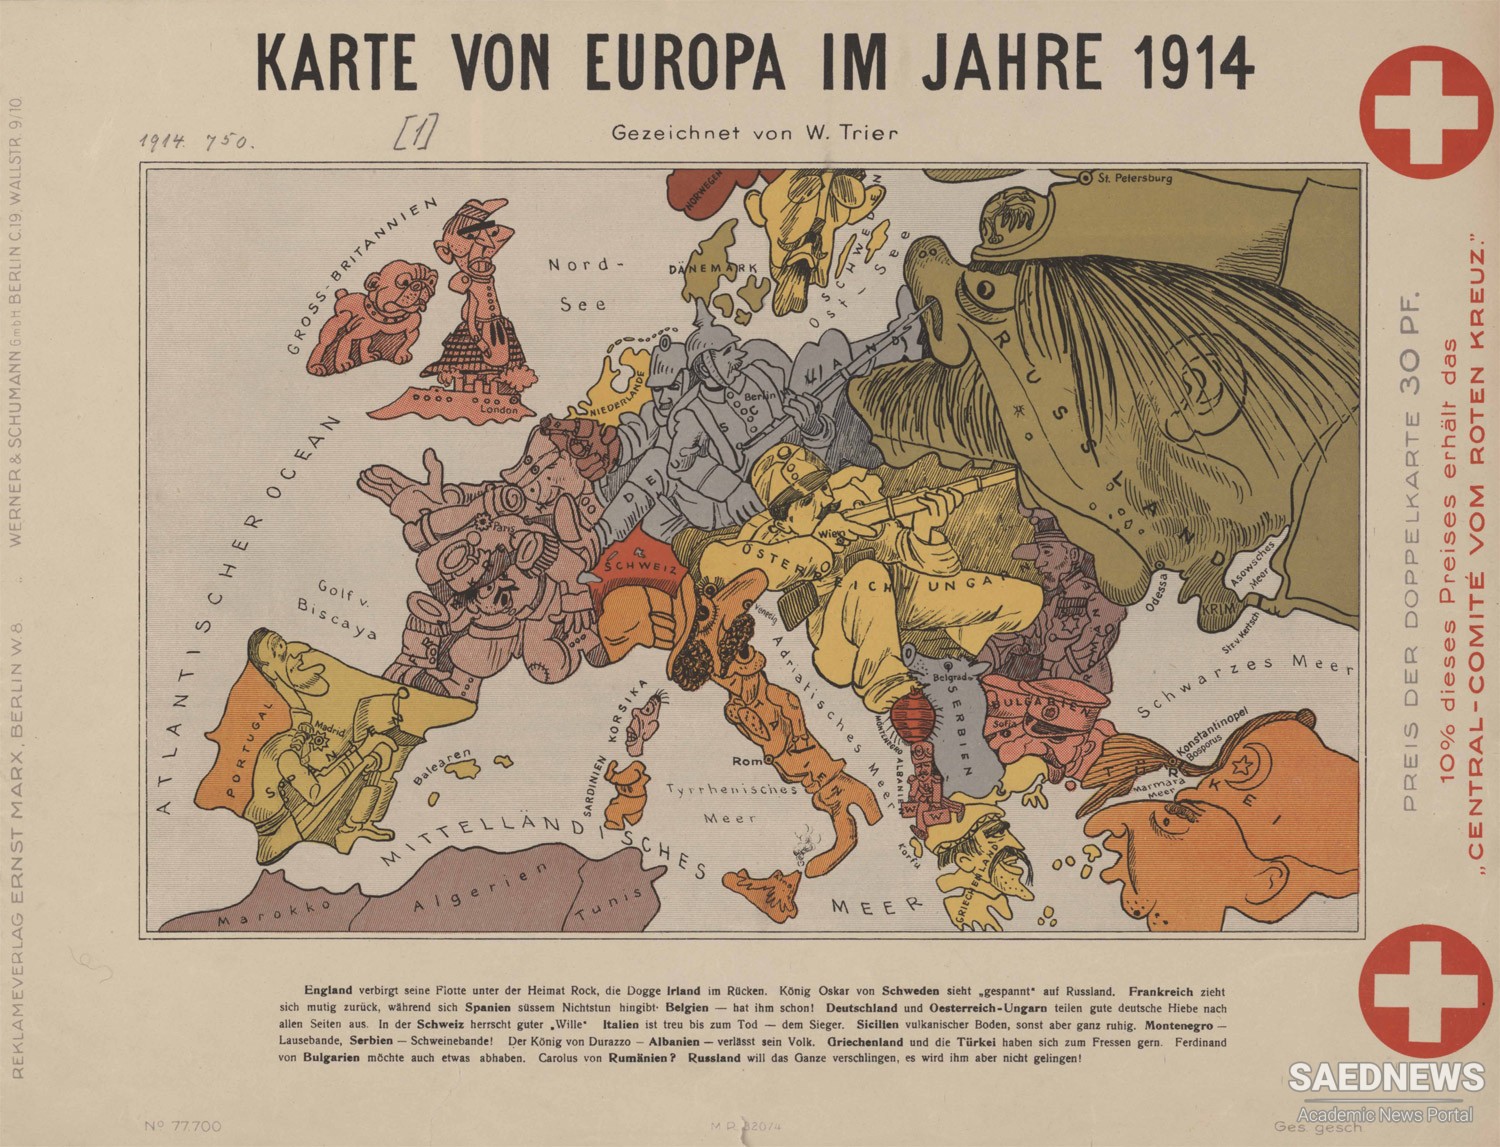 The European Powers in 1914